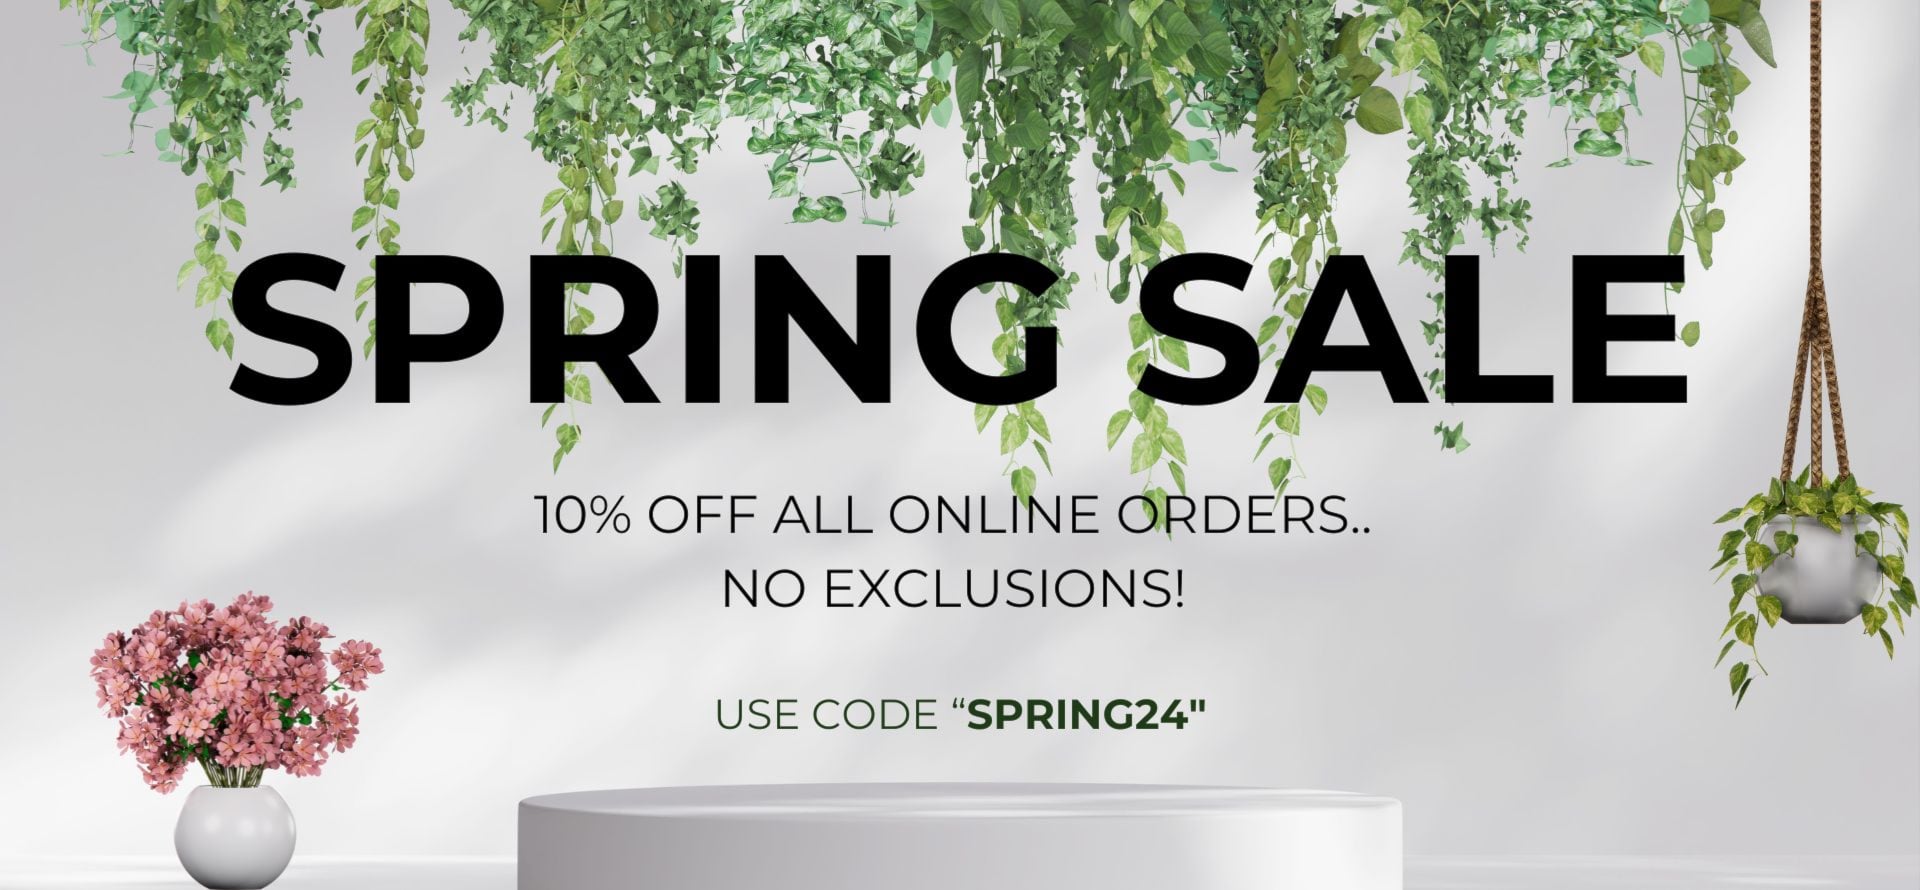 spring sale 10% off online orders no exclusions